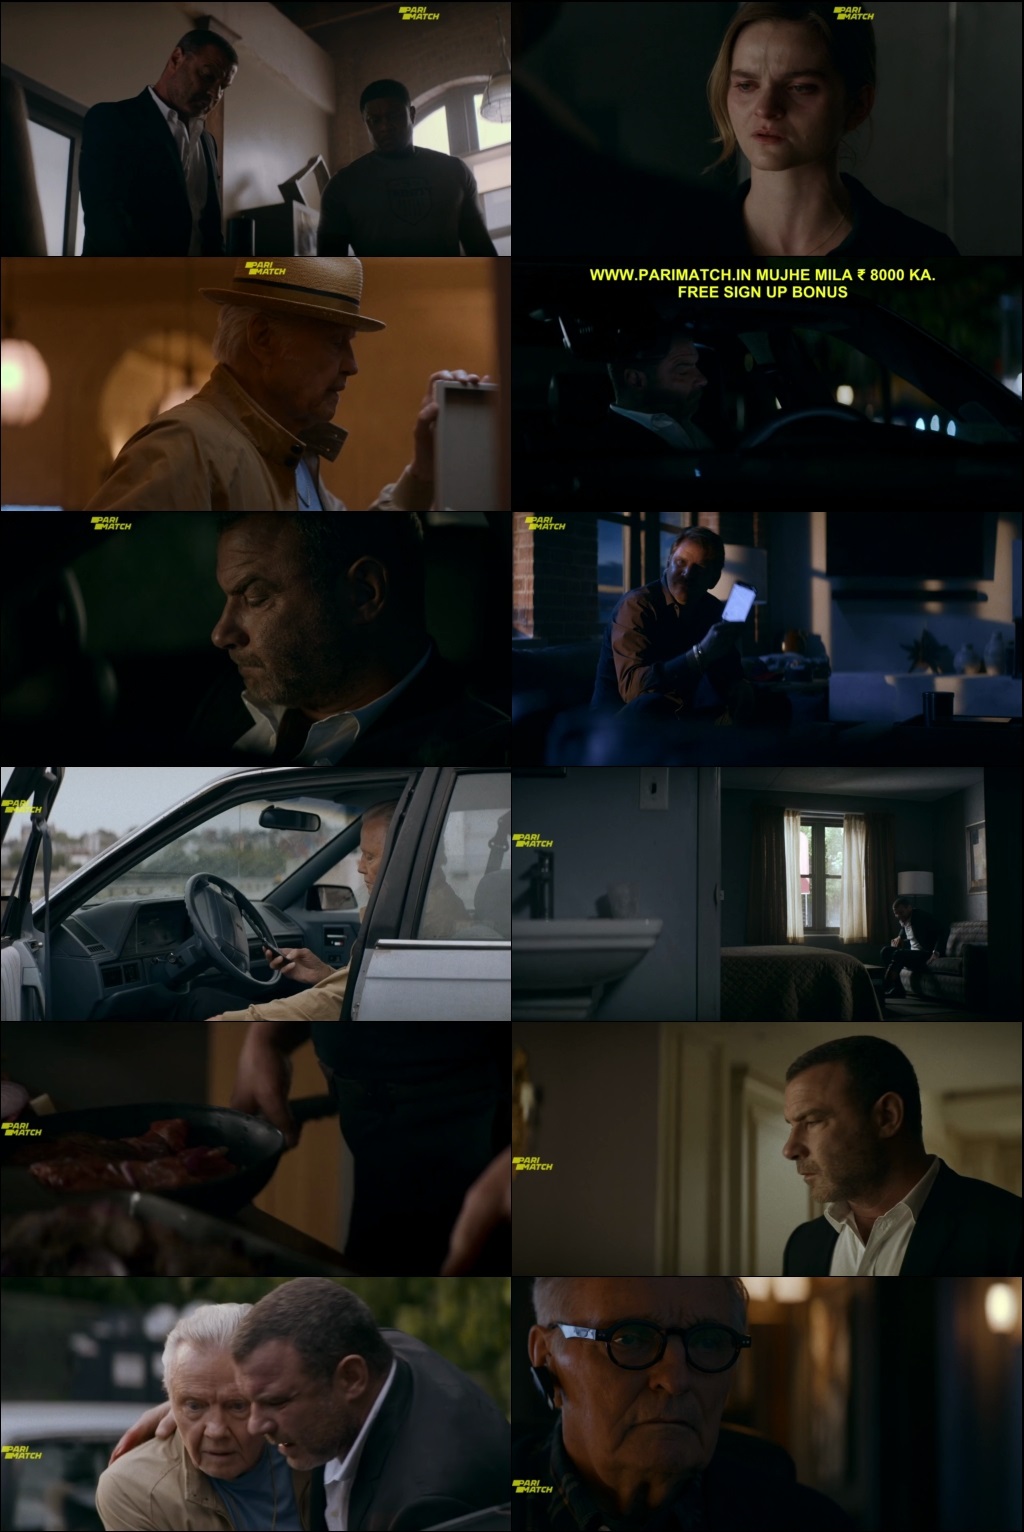 Ray Donovan The Movie 2022 HDRip 750MB Bengali (Voice Over) Dual Audio 720p Download